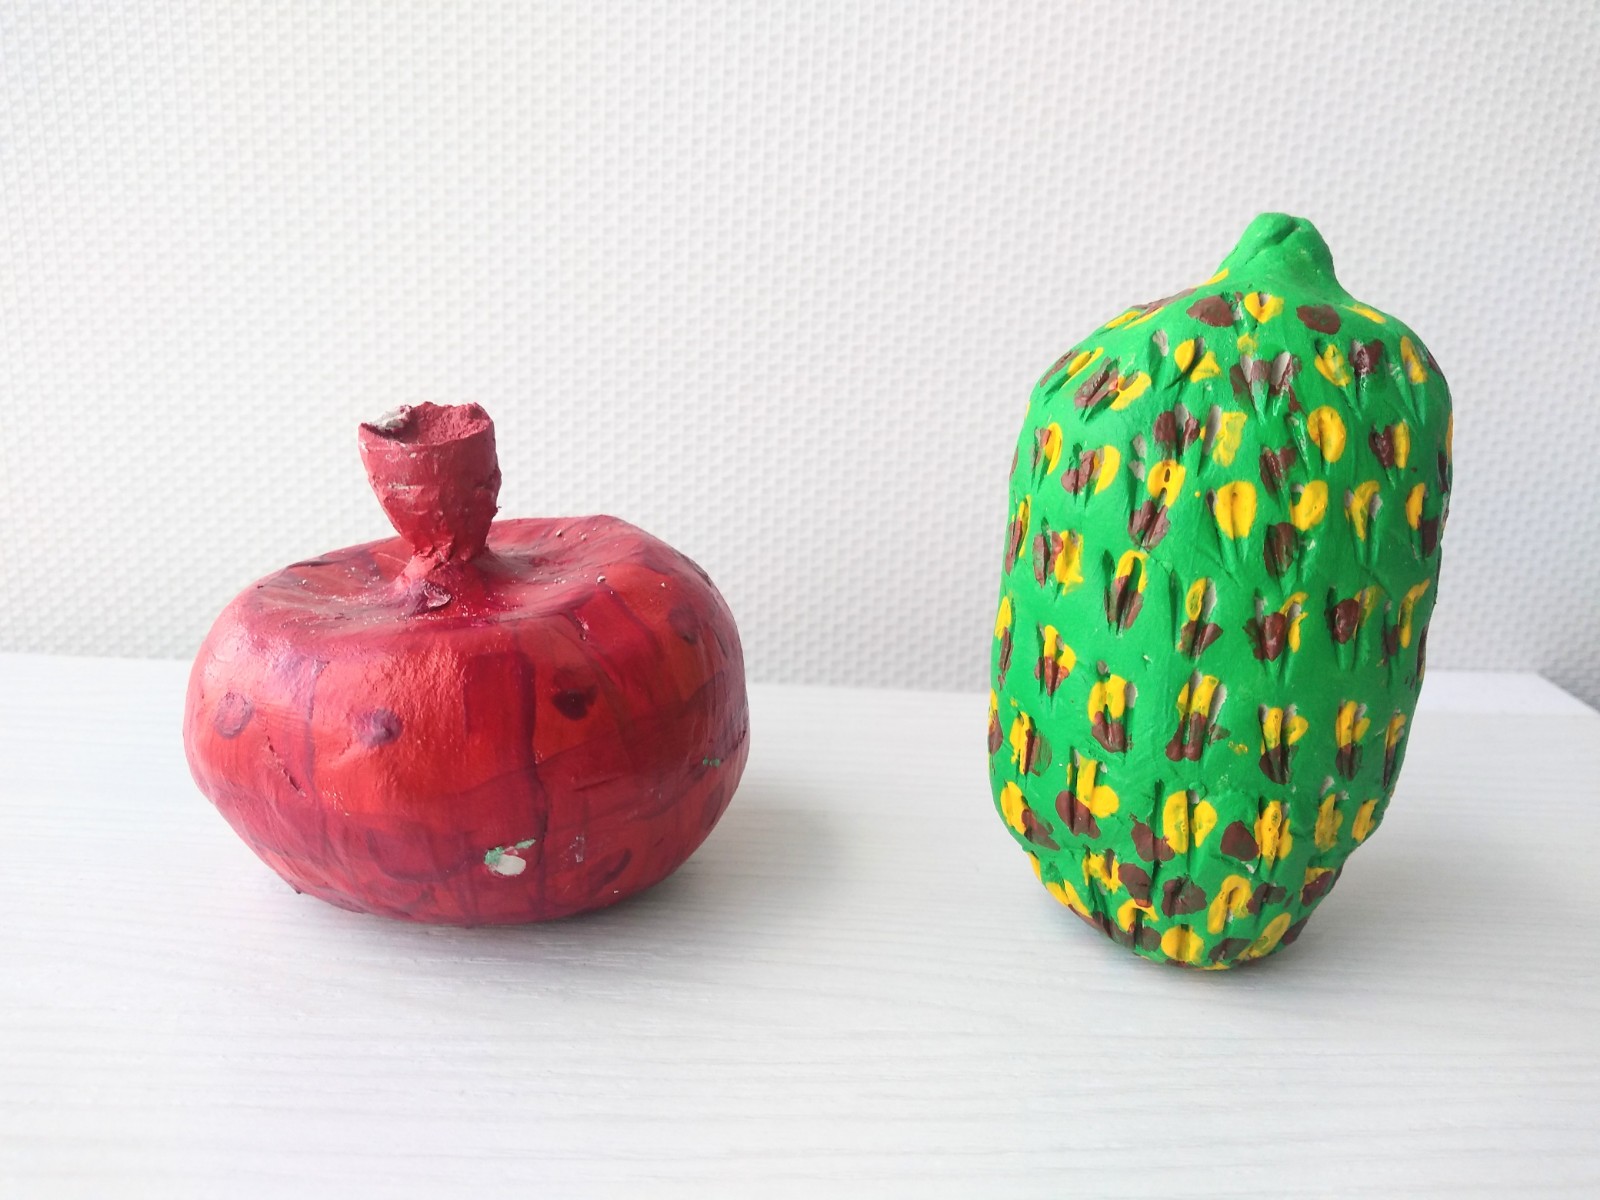 Two pieces of fruit, one red pomegranate and oval green fruit with yellow and brown spots.